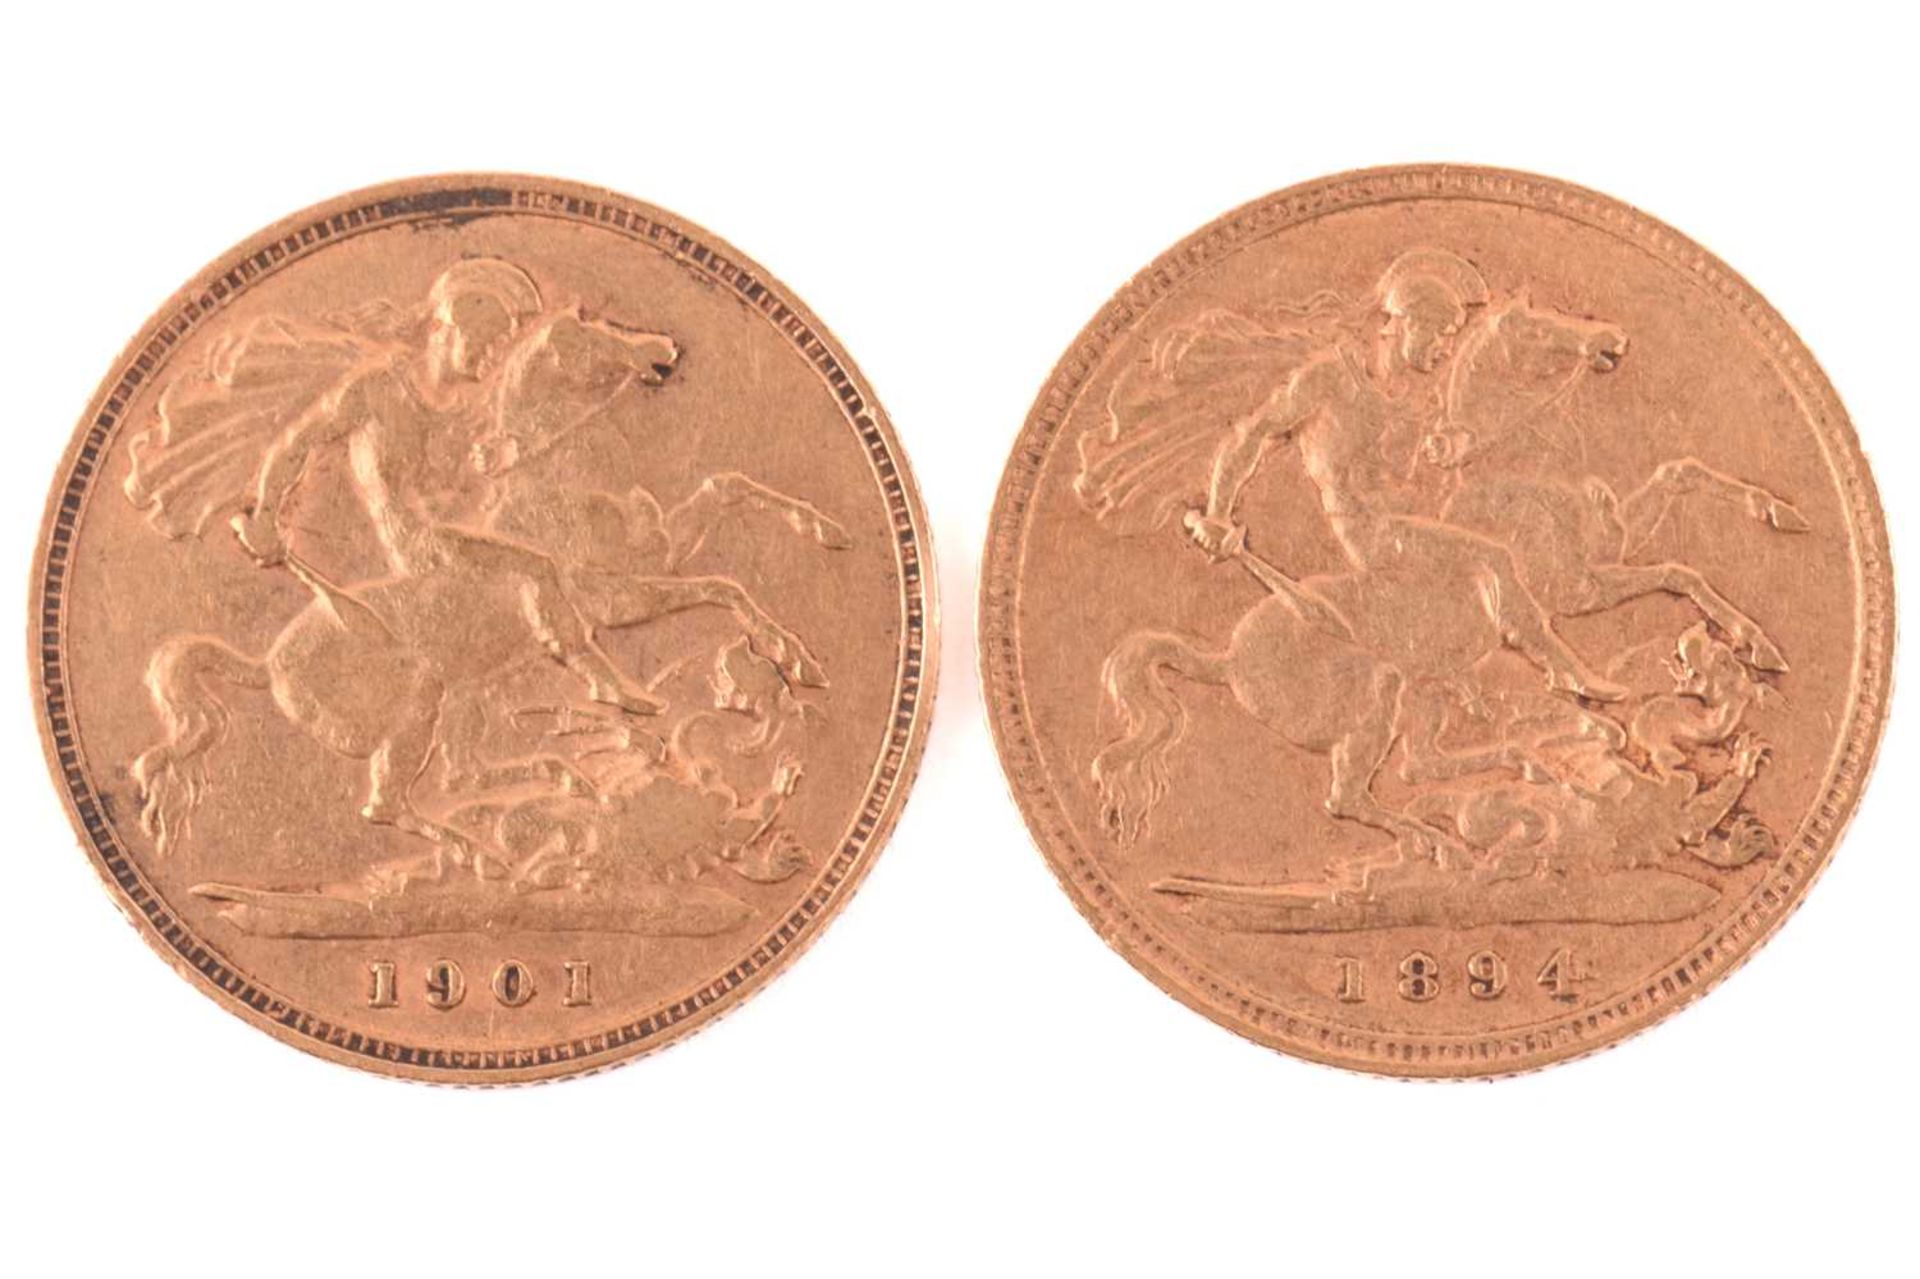 Two Victoria half sovereigns 1894 and 1901, obverse with veiled head left